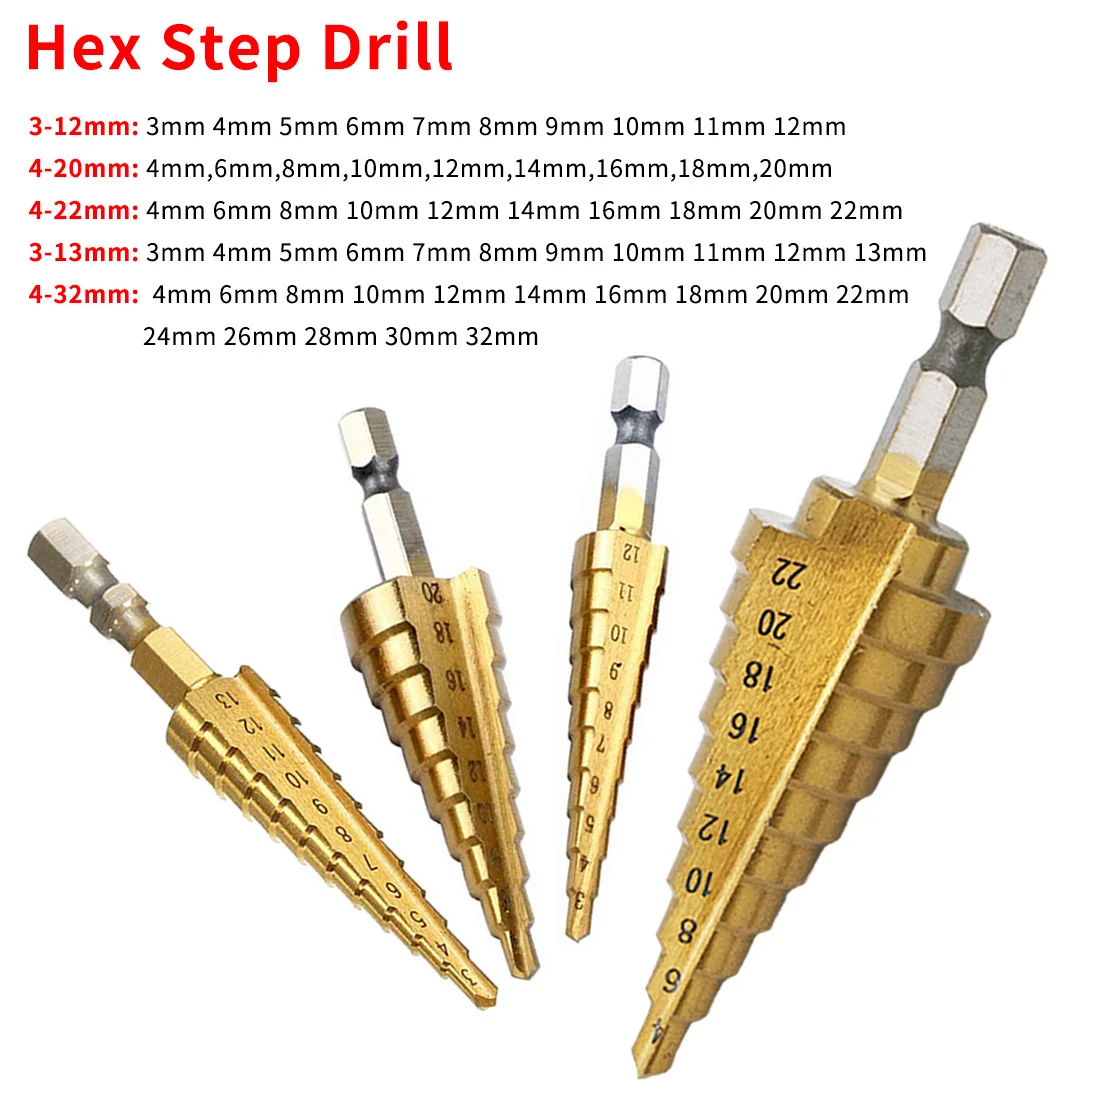 HSS 4241 3-12mm/13mm 4-20mm/22mm/32mm Hex Shank Tapered Titanium Step Stepped Cone Drill Bit Metal Hole Cutter Power Tools